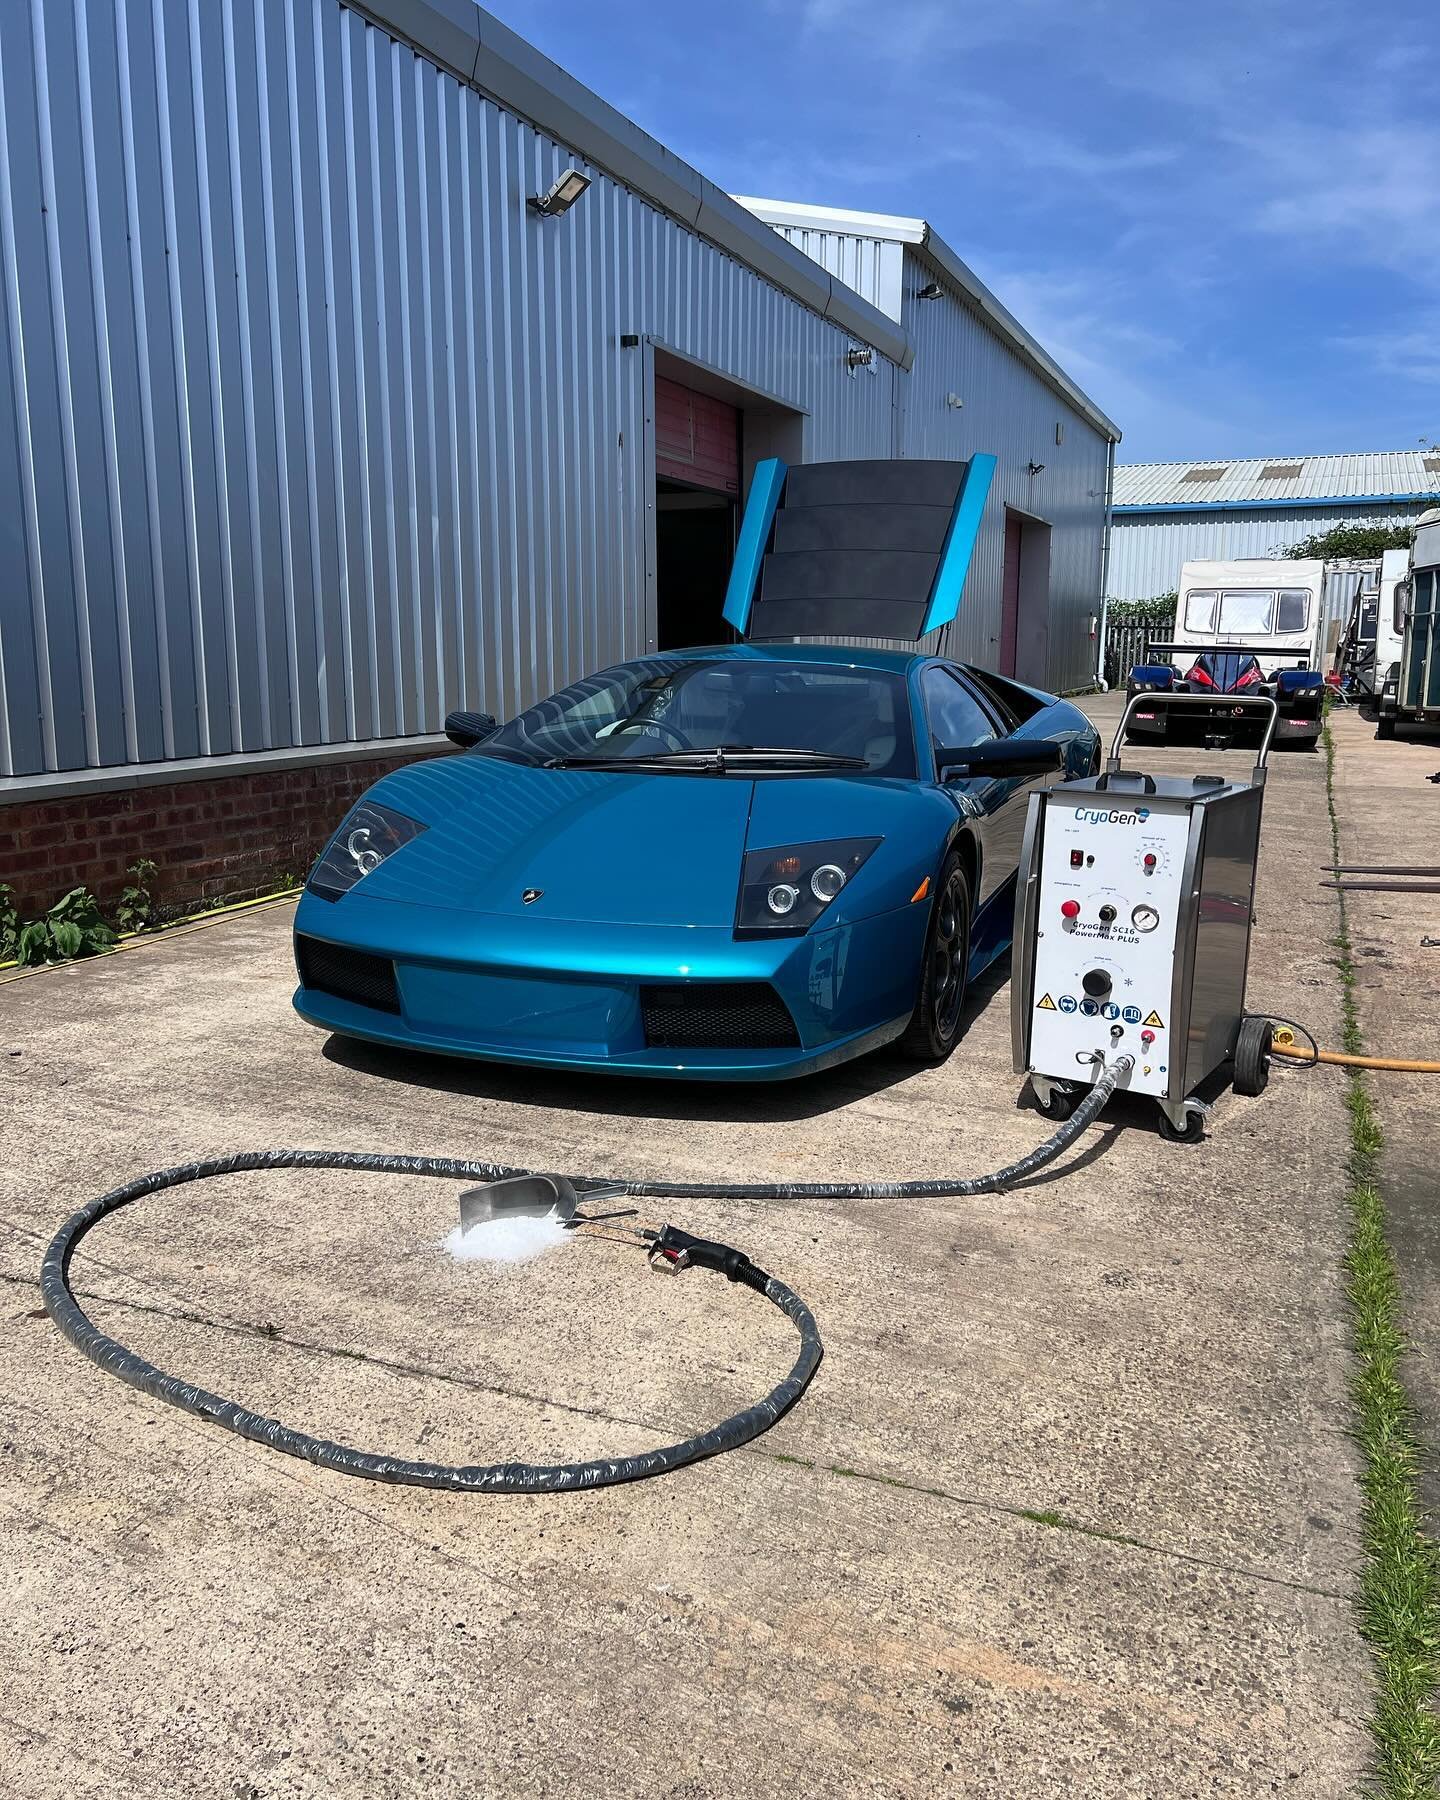 Sun is shining, weather is sweet☀️

Lamborghini spa day✨

✉️ hello@iceblasters.co.uk 
📞 01604 266256
🚨 Nationwide coverage 
🌎 www.iceblasters.co.uk

#dryice #dryiceblasting #mobile #dryicecleaning #nationwide #service #automotive #restoration #lam